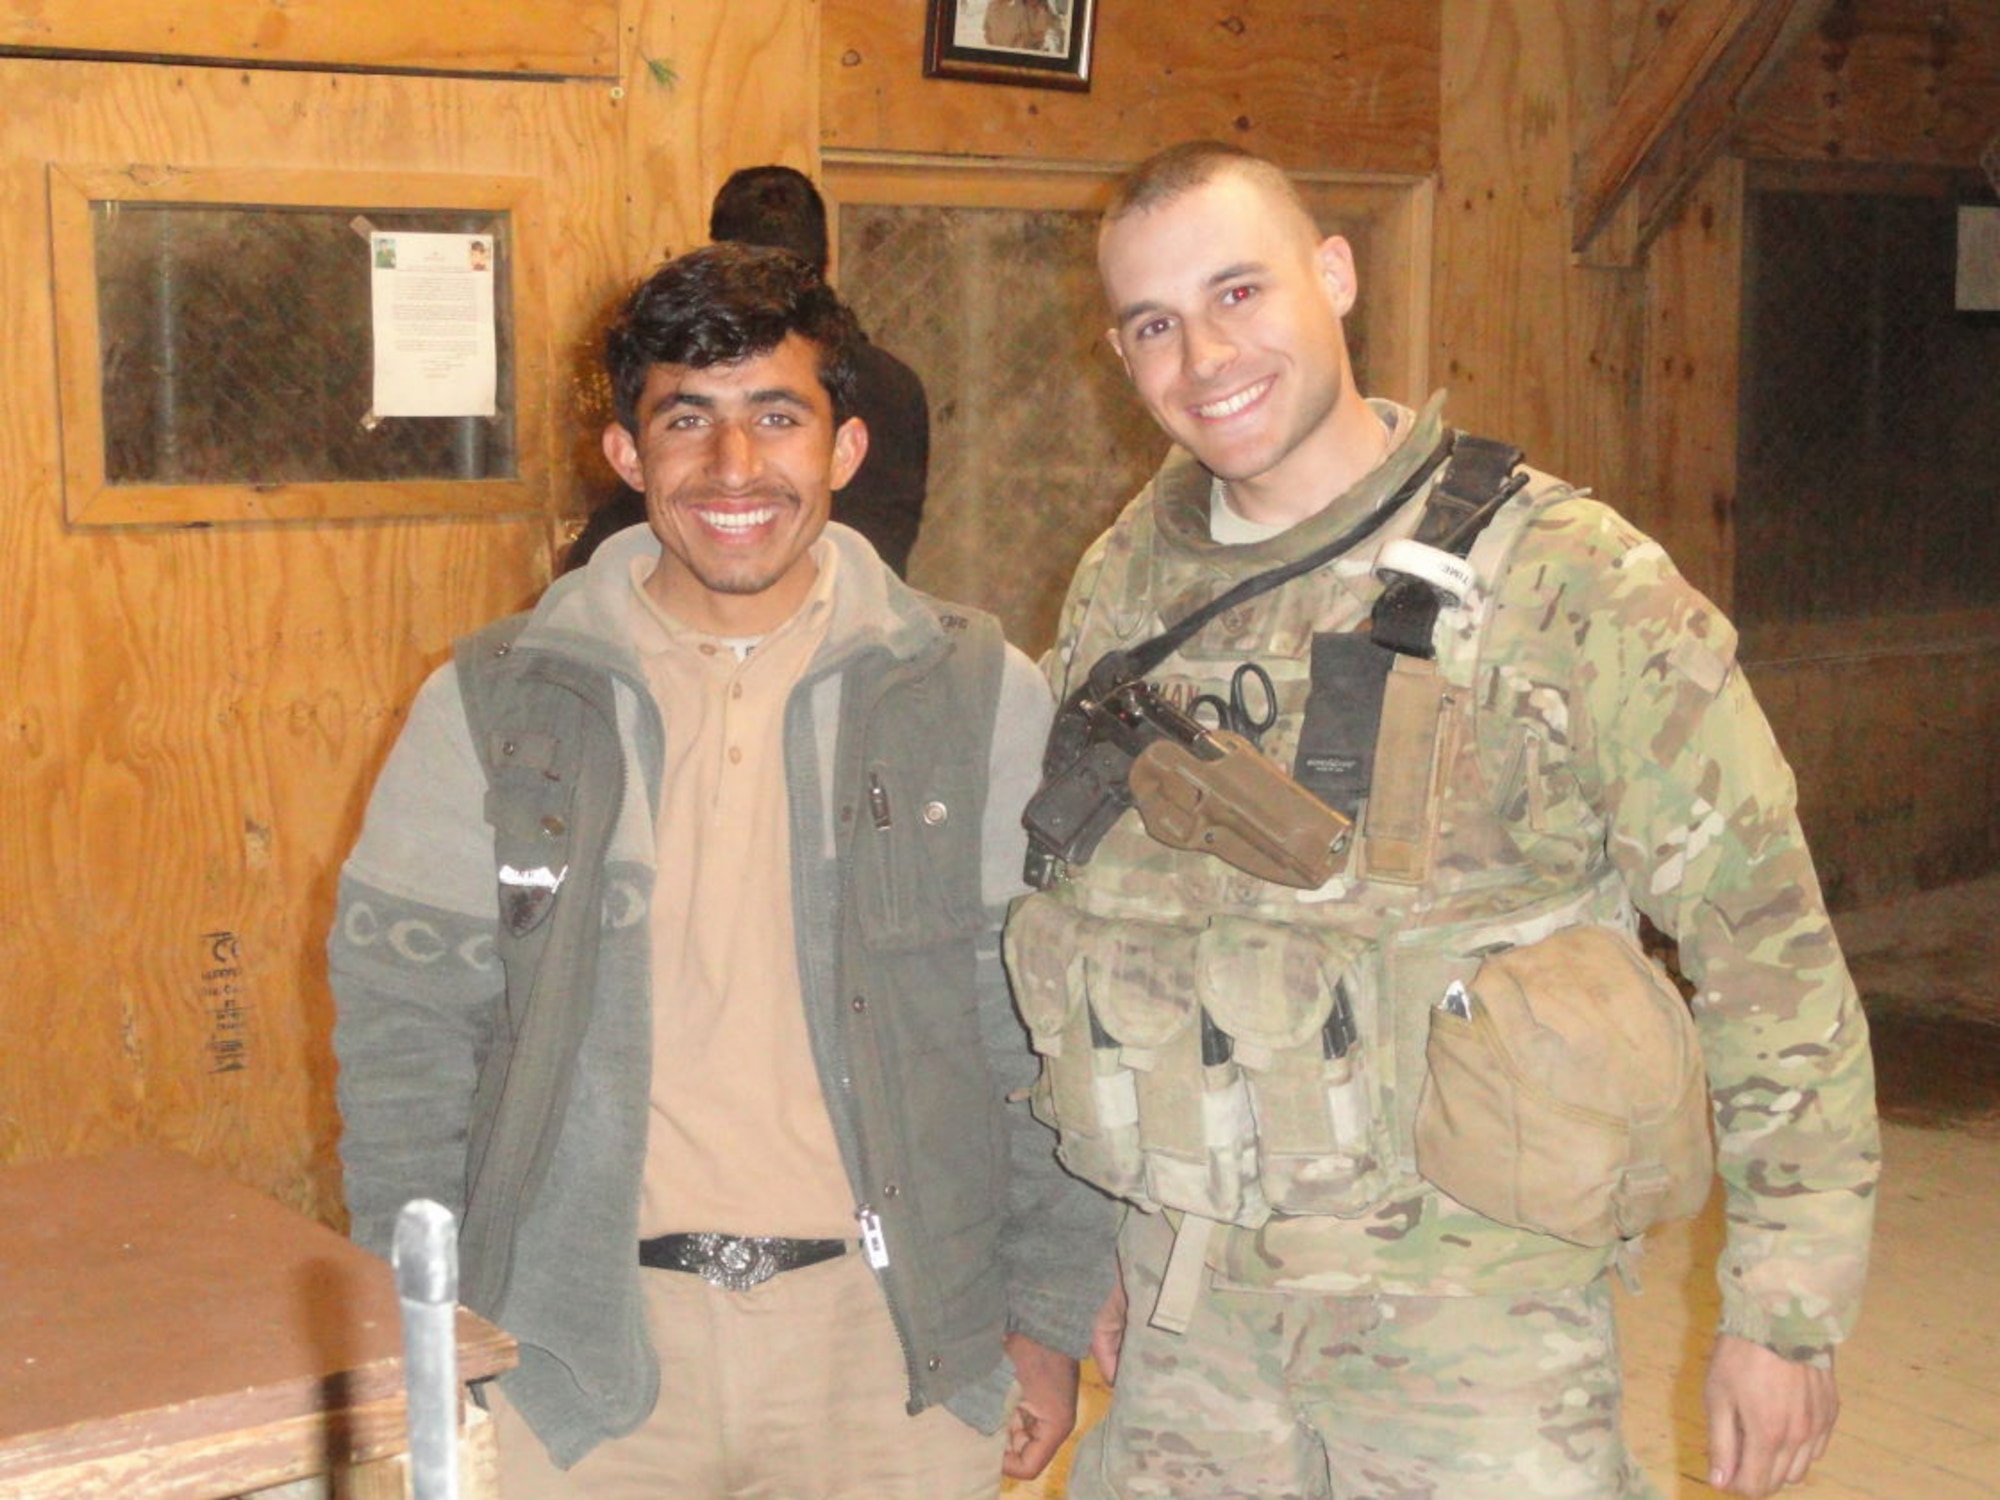 Staff Sgt. Samuel Lerman (right), 459th Security Forces Squadron, poses for a photo with Safiullah, an Afghan contractor, during a 2011 deployment to Bagram Air Field, Afghanistan. Lerman utilized Self-Aid-And-Buddy-Care training he received at Joint Base Andrews, Md., to help save Safiullah's life following a rocket attack during his deployment. After healing from his wounds, Safiullah returned to work shortly before Lerman completed his Afghanistan tour. (Submitted photo)